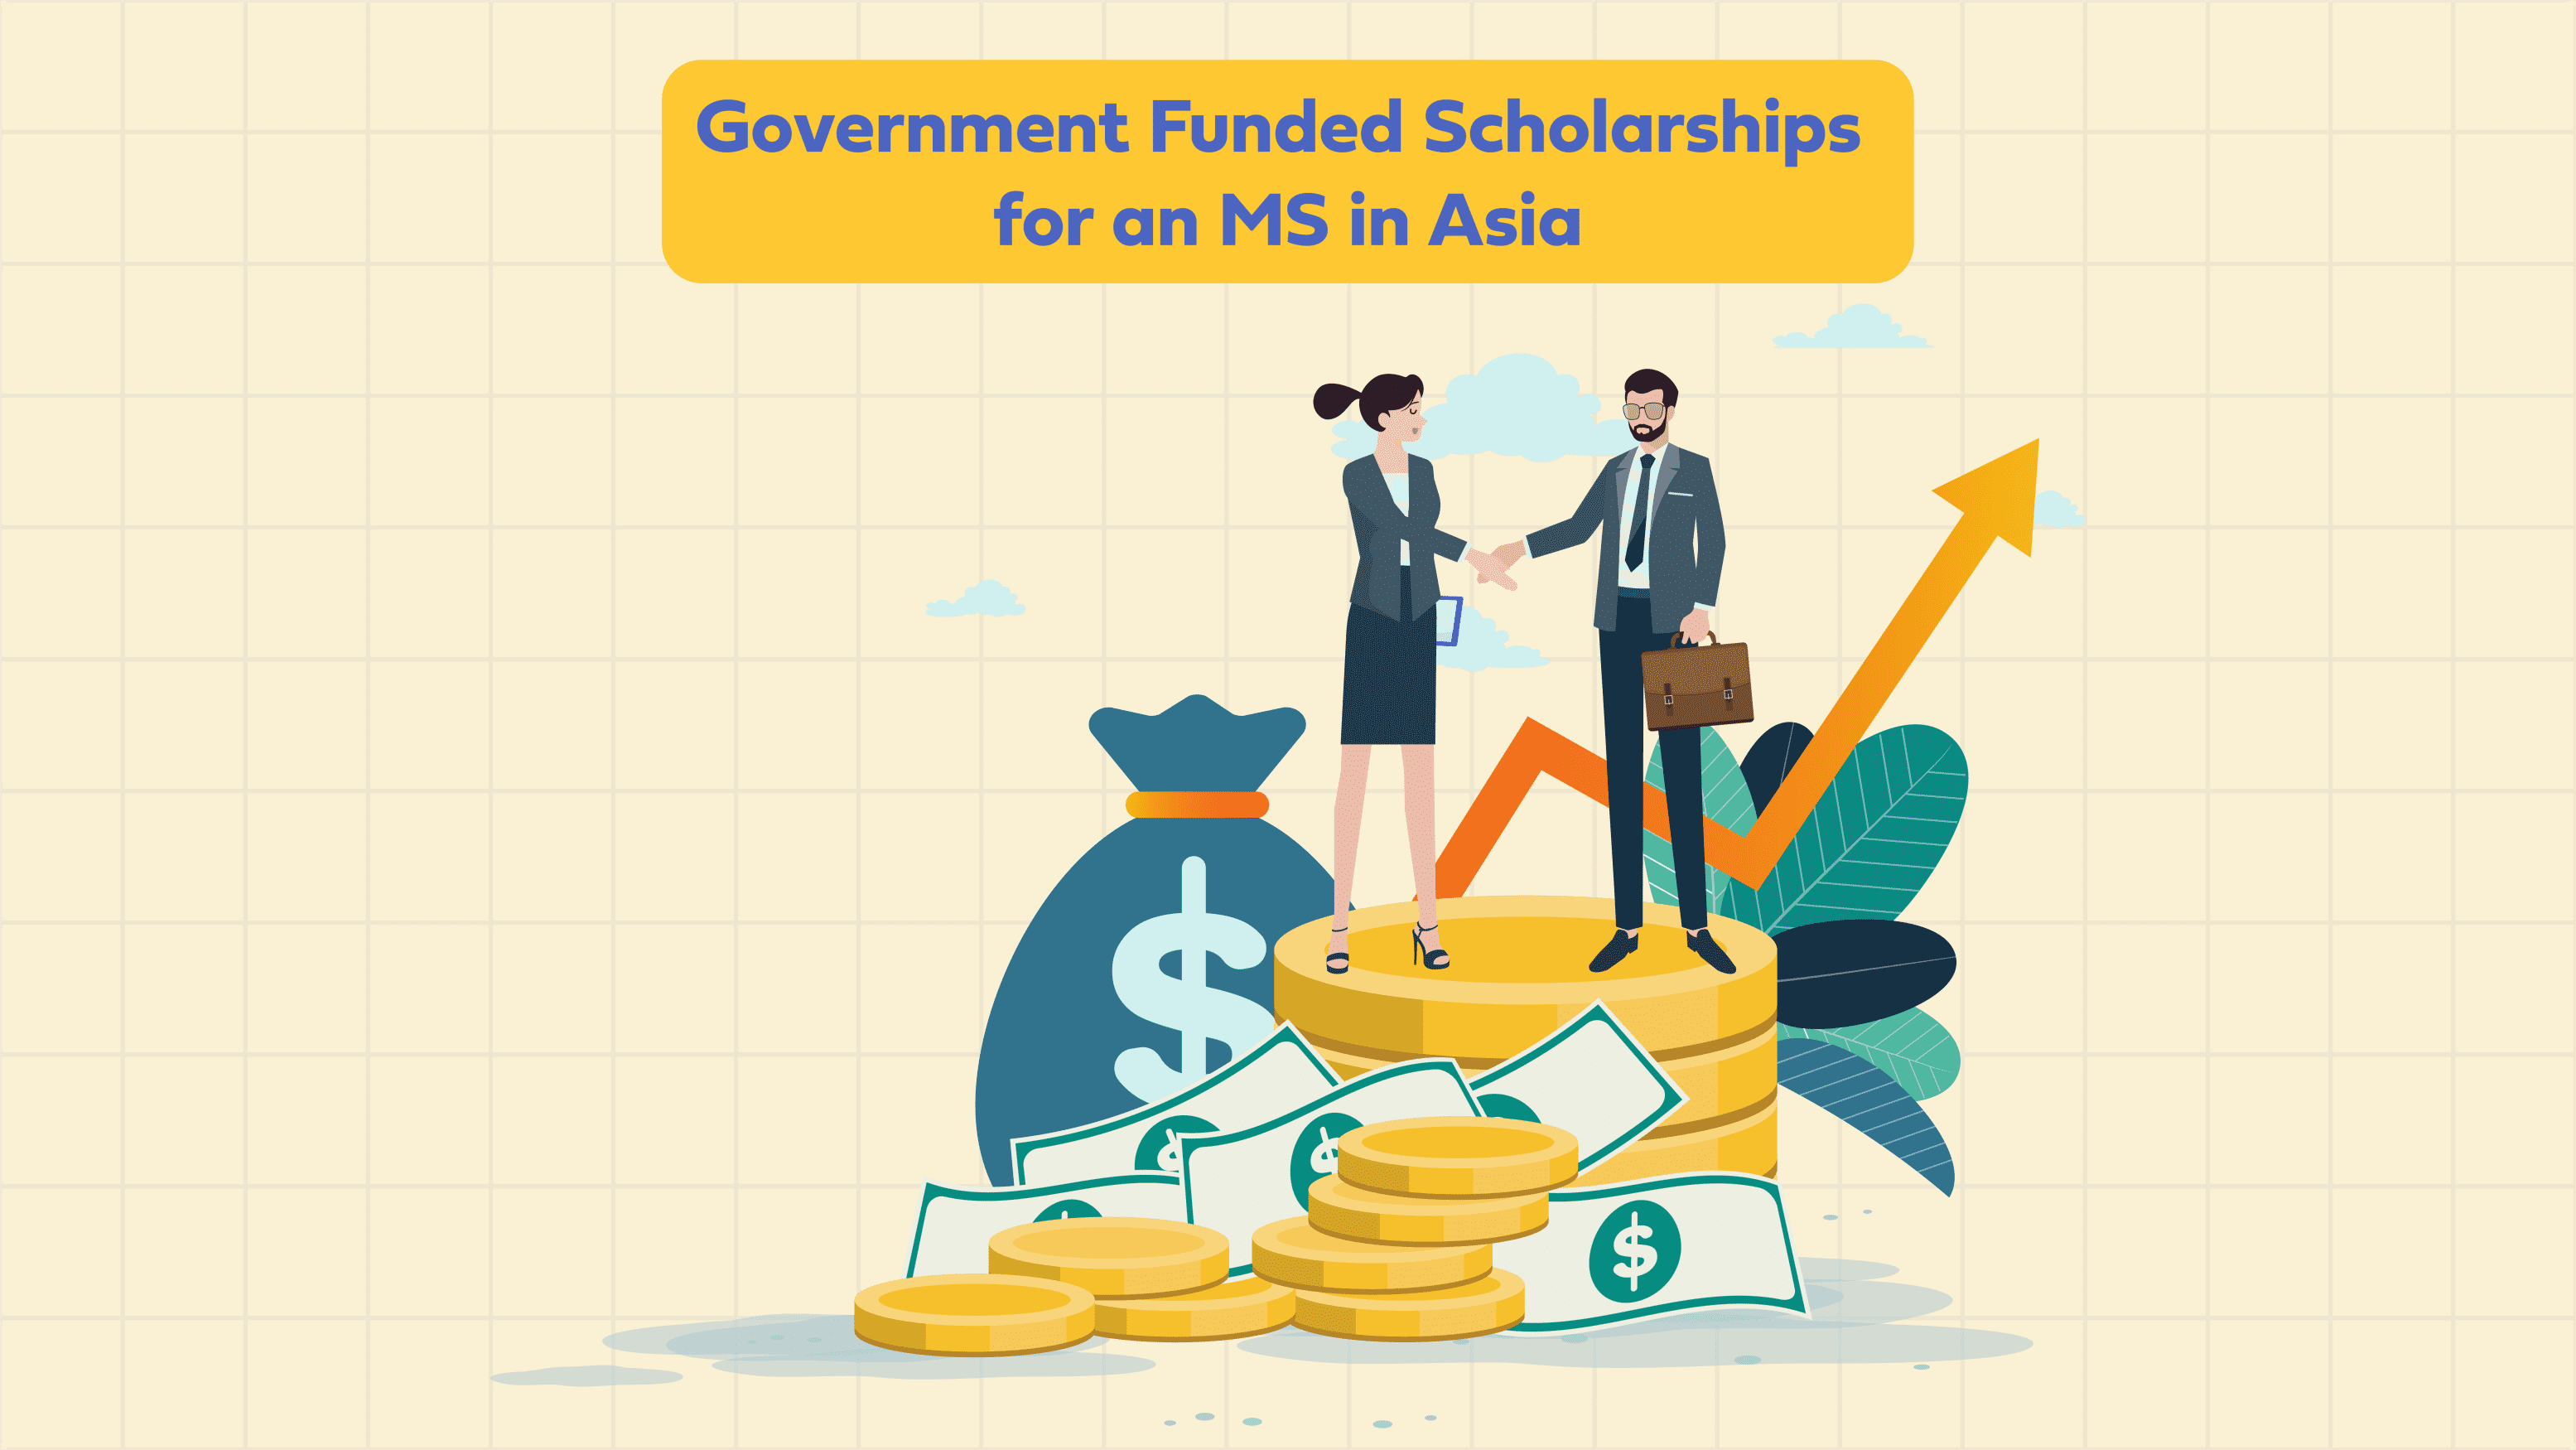 Government-Funded Scholarships for an M.S. in Asia